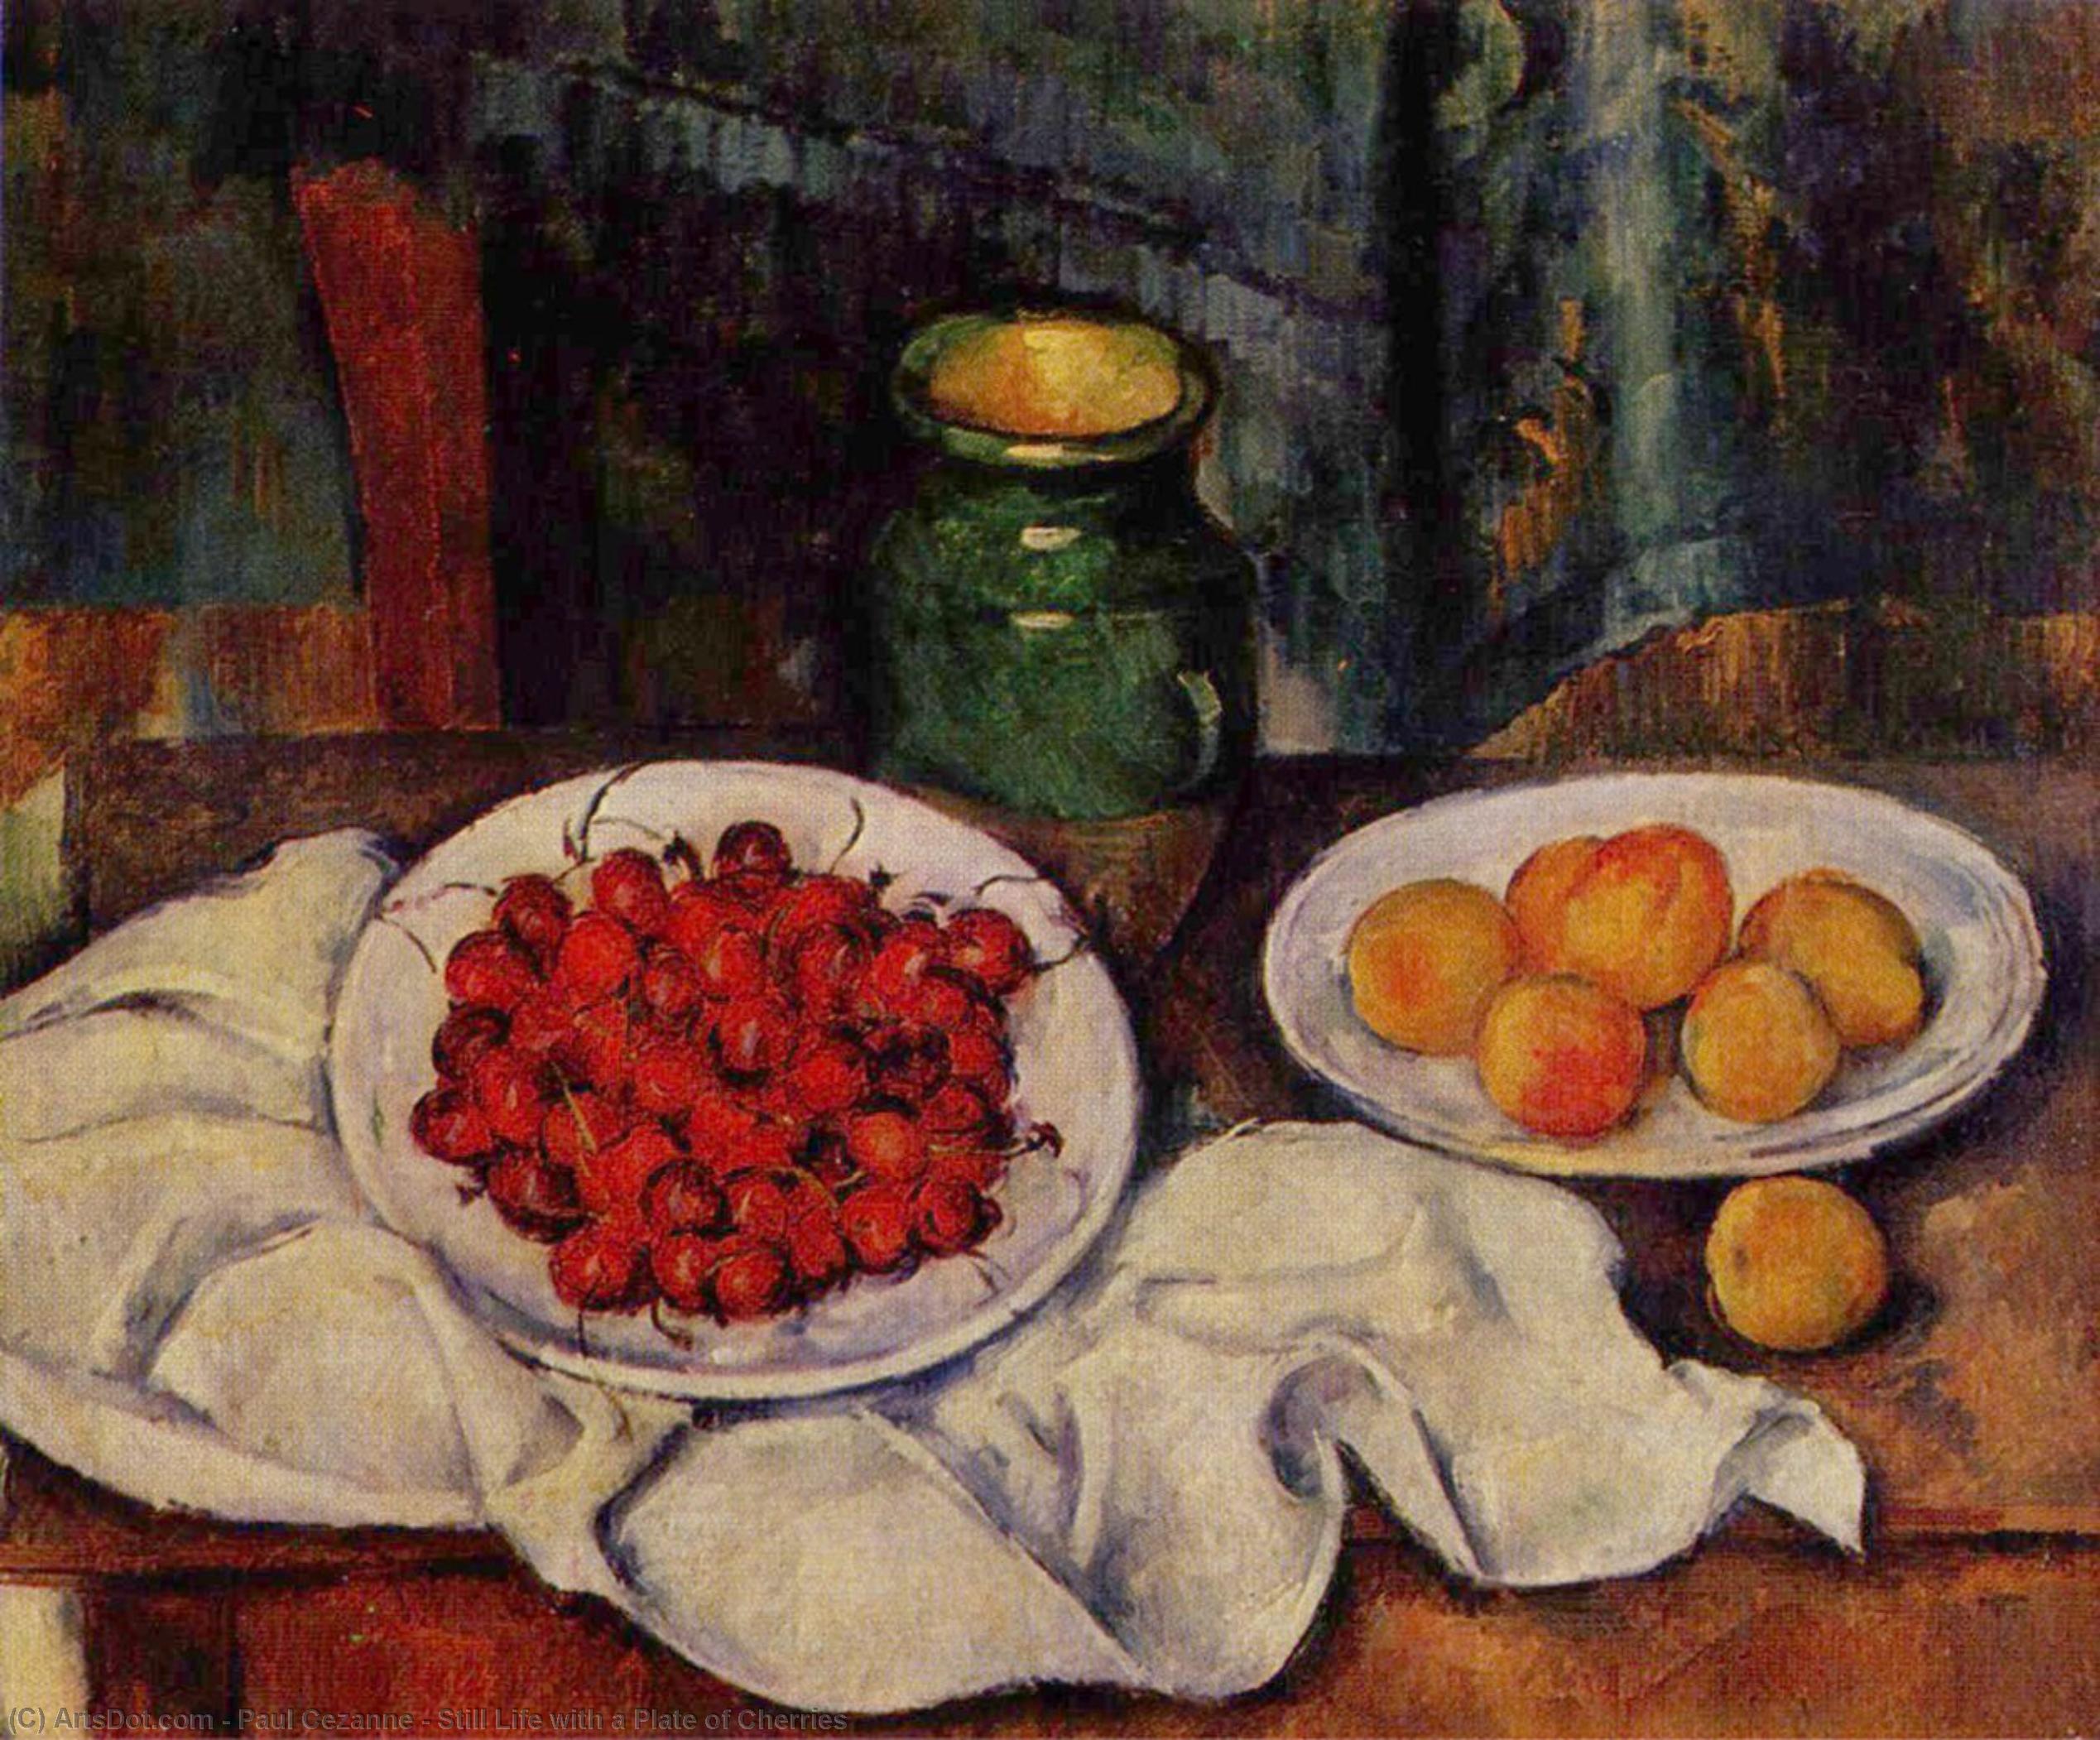 WikiOO.org - 백과 사전 - 회화, 삽화 Paul Cezanne - Still Life with a Plate of Cherries